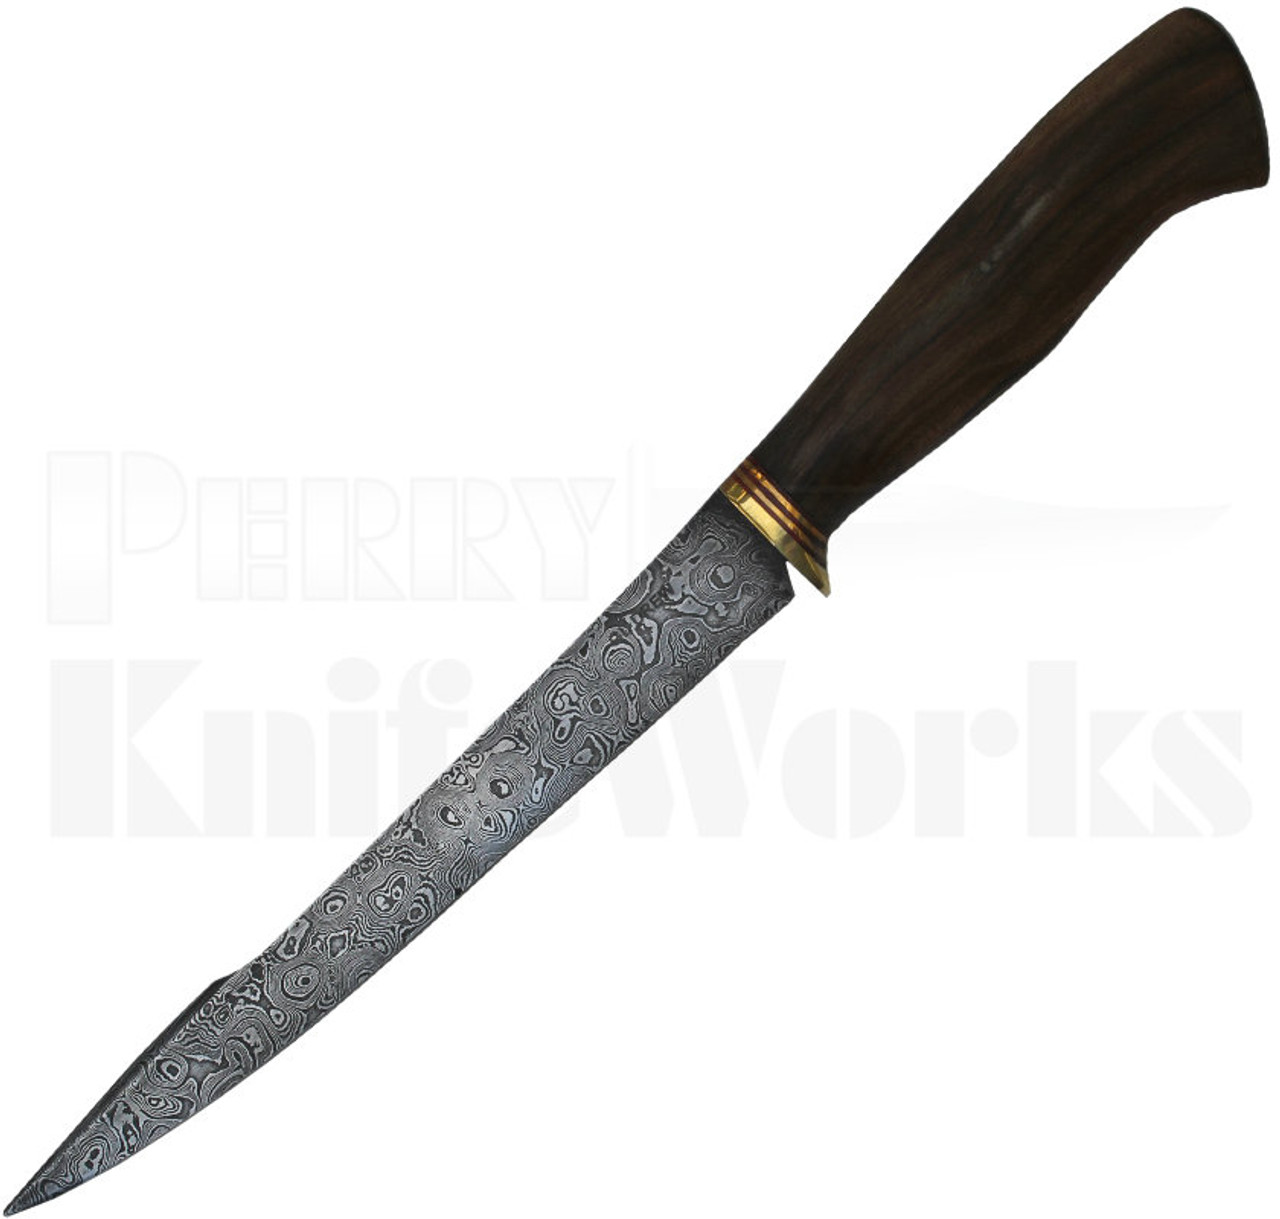 Gerry Drew Rain Drop Damascus Fillet Knife Spalted Maple